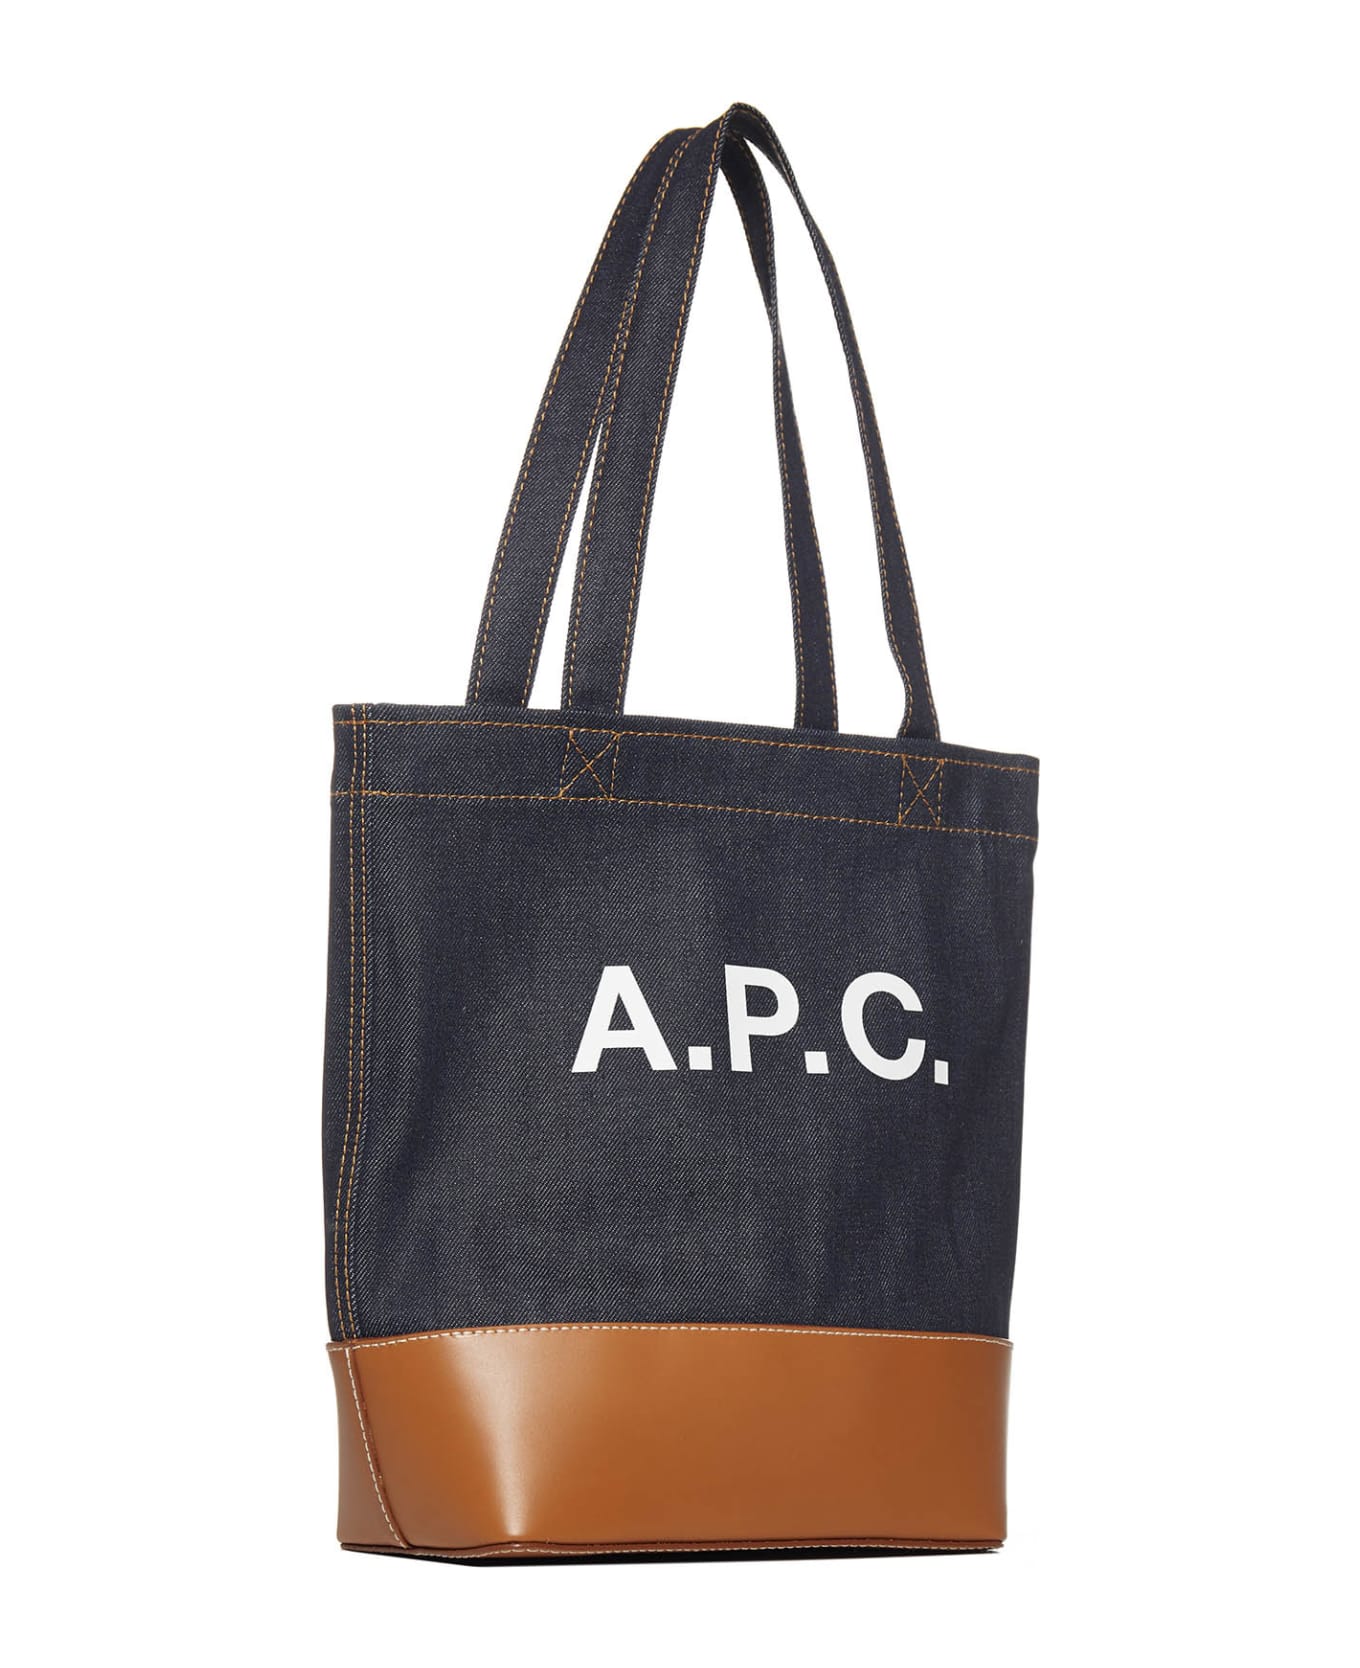 A.P.C. Axelle Small Tote Bag - Brown トートバッグ